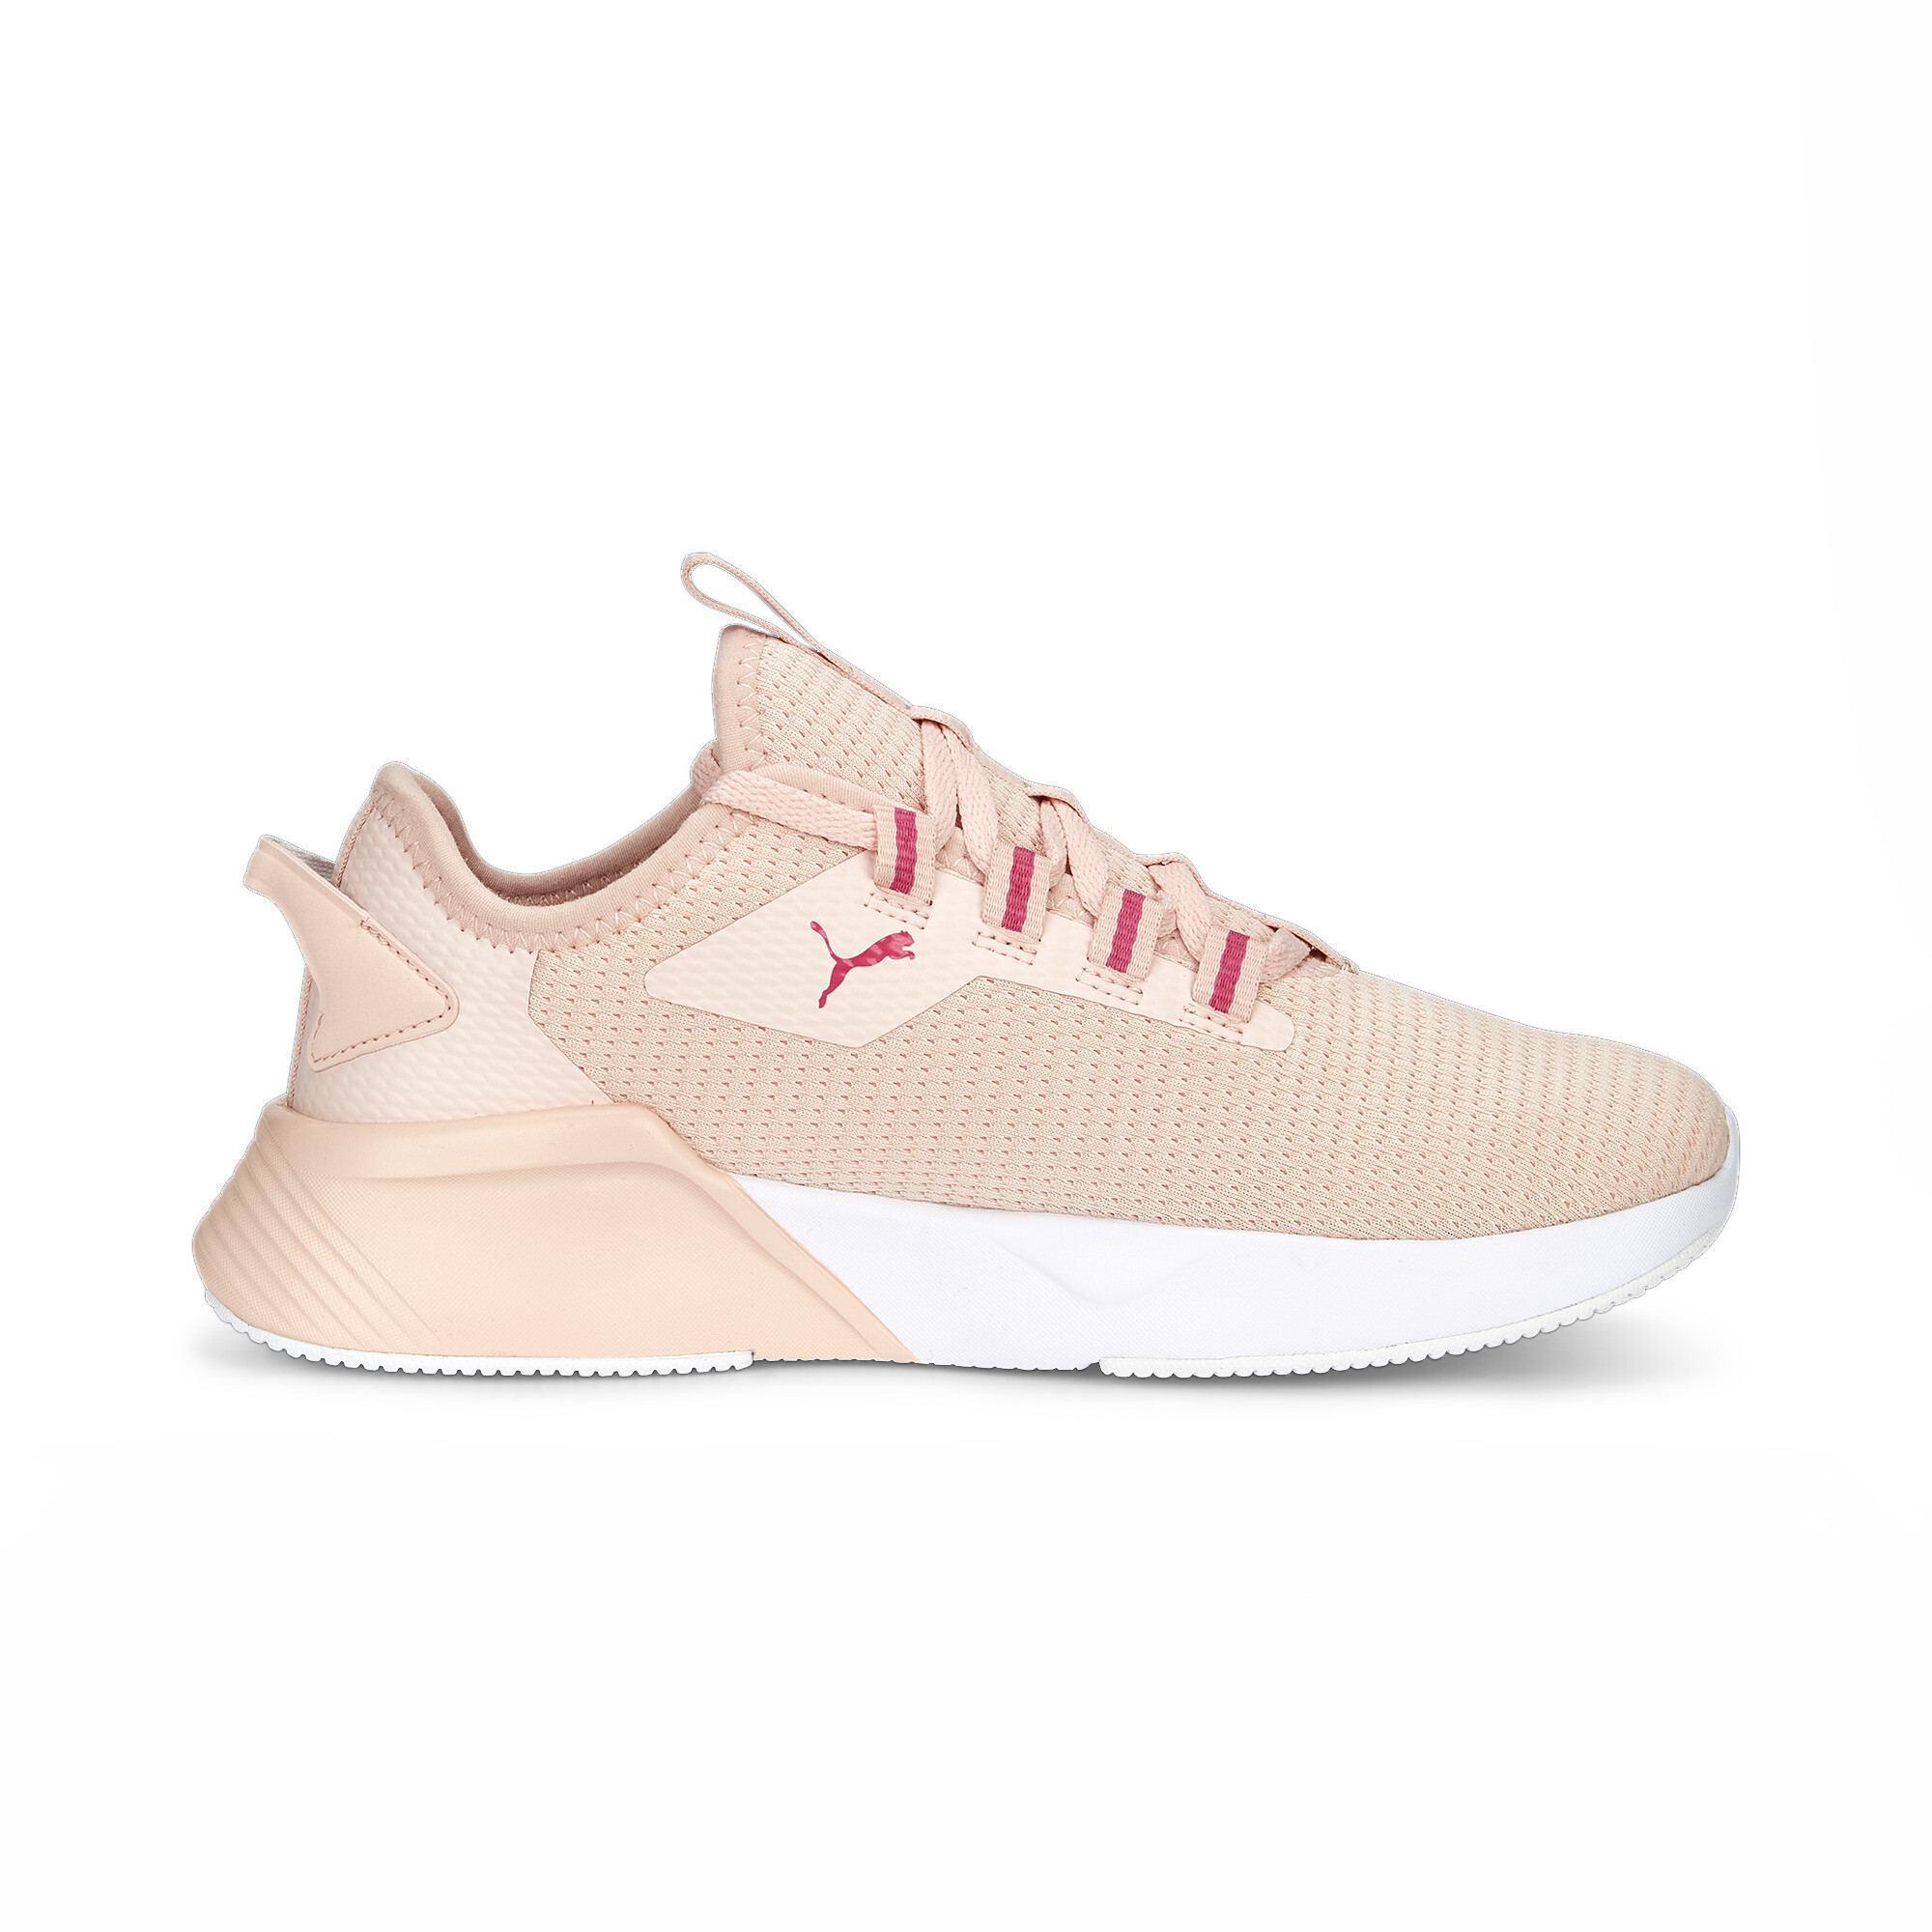 Puma Retaliate 2 Sneakers Youth, Pink, Size 36, Shoes